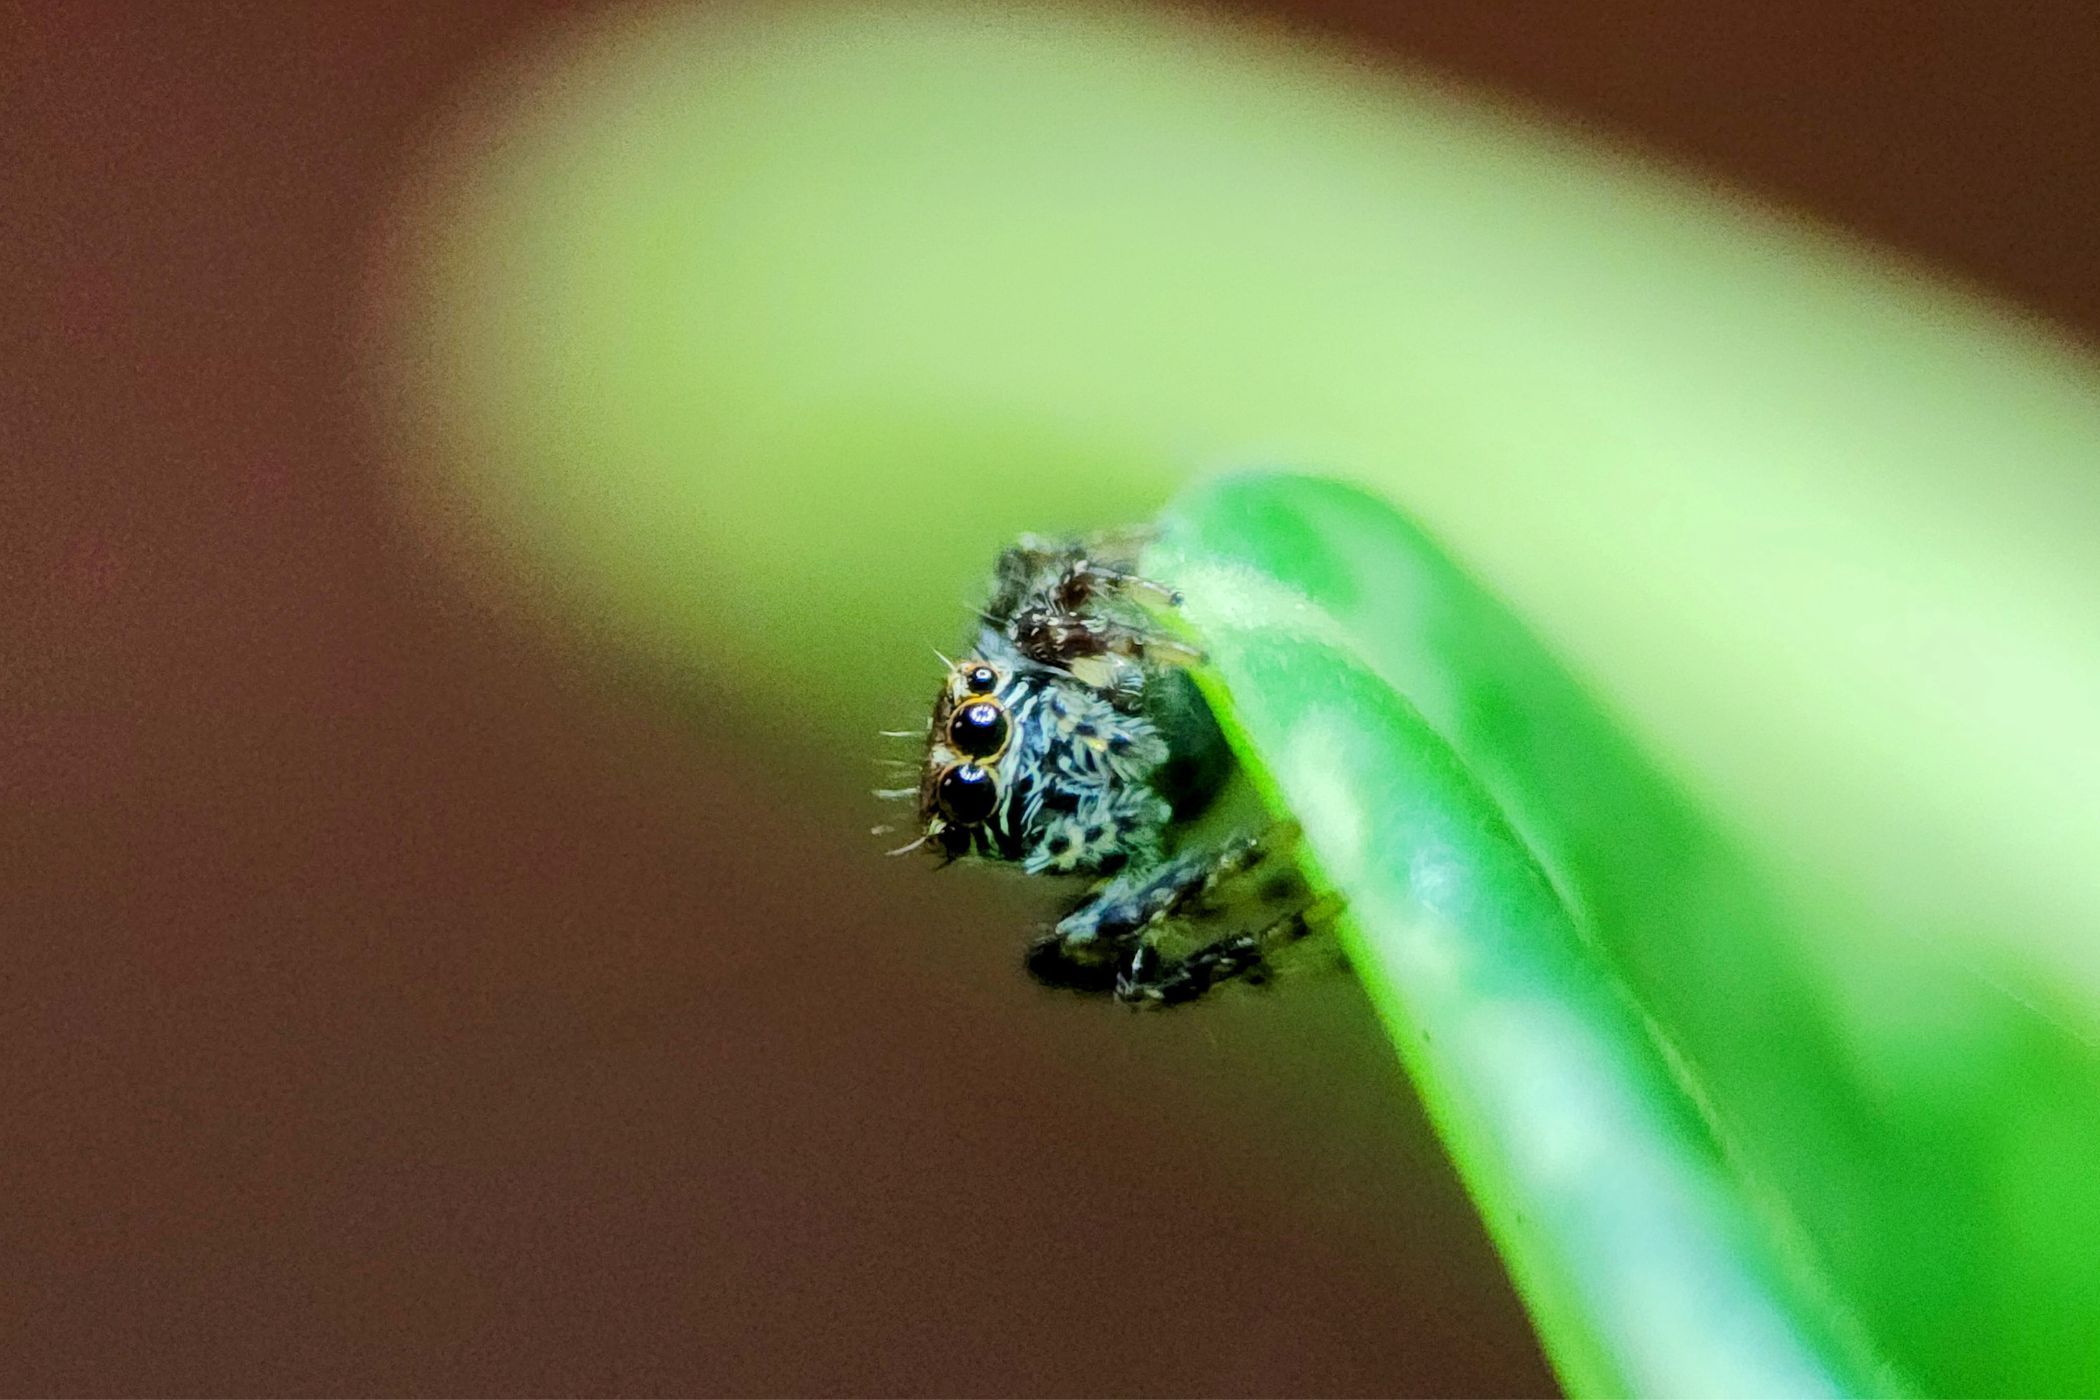 A macro photo of a jumping spider sitting on a leaf